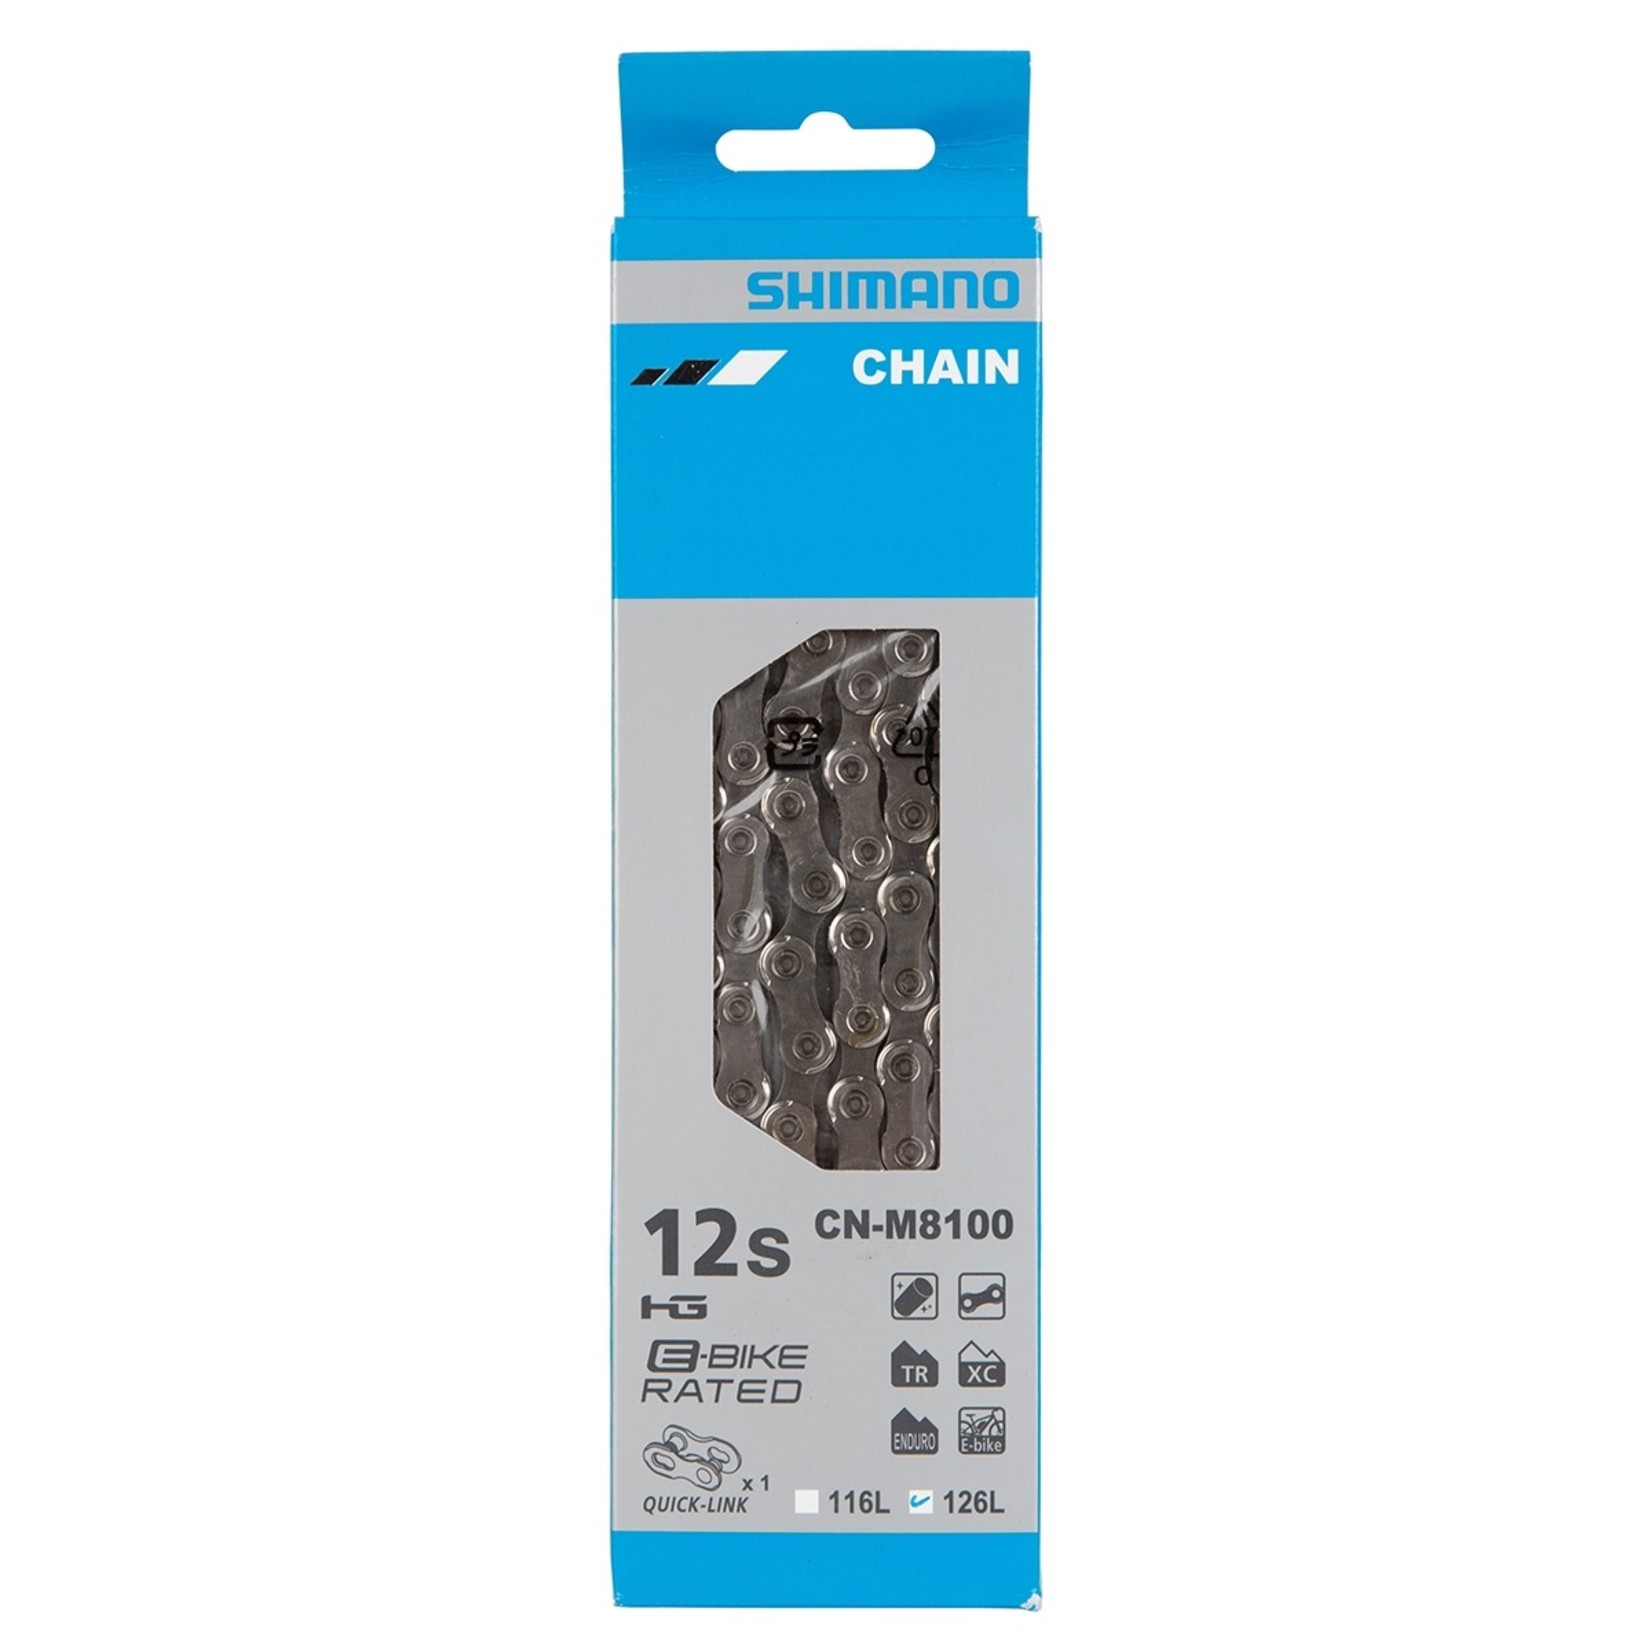 Shimano CN-M7100 SLX/Road Chain With Quick Link, 12-Speed, 126L